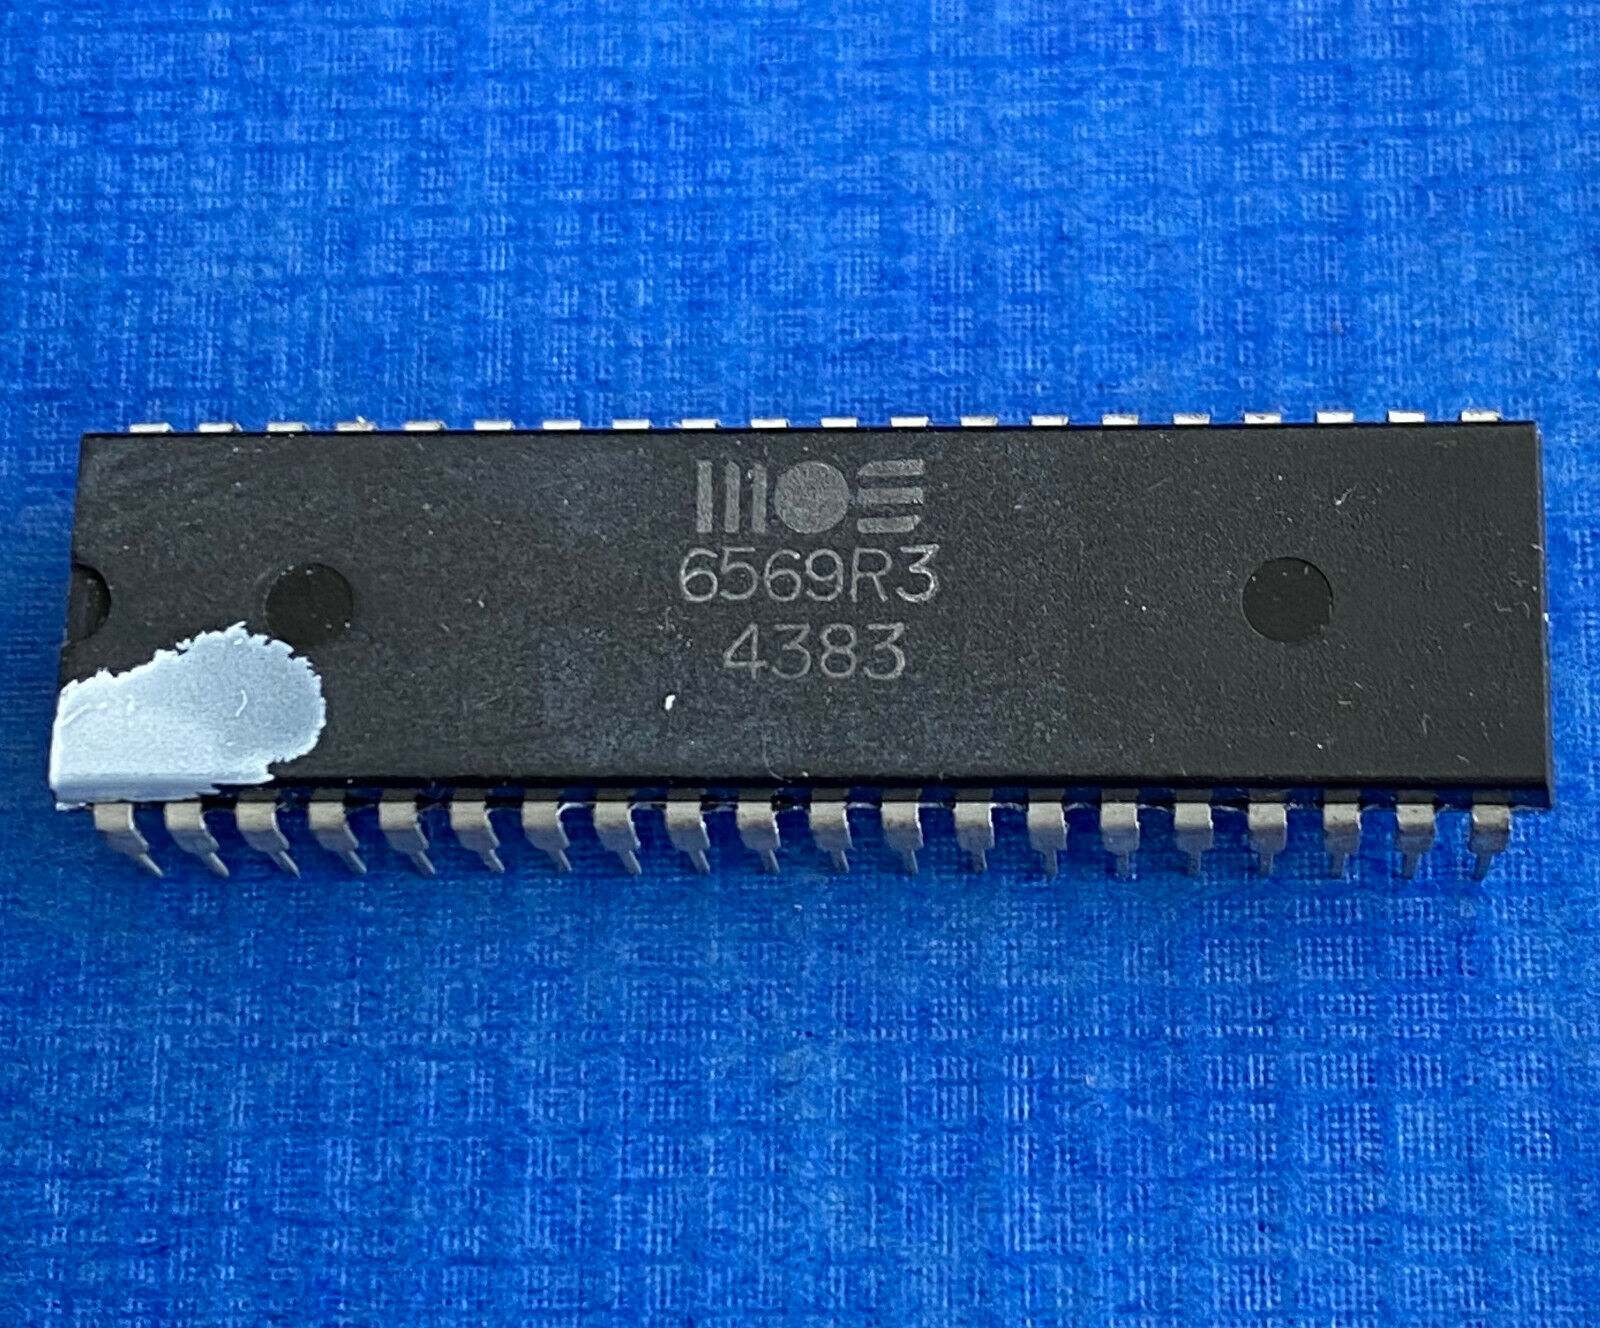 Mos 6569R3 Vic Video Chip Ic for Commodore C64, SX64 / P. Week: 43 83